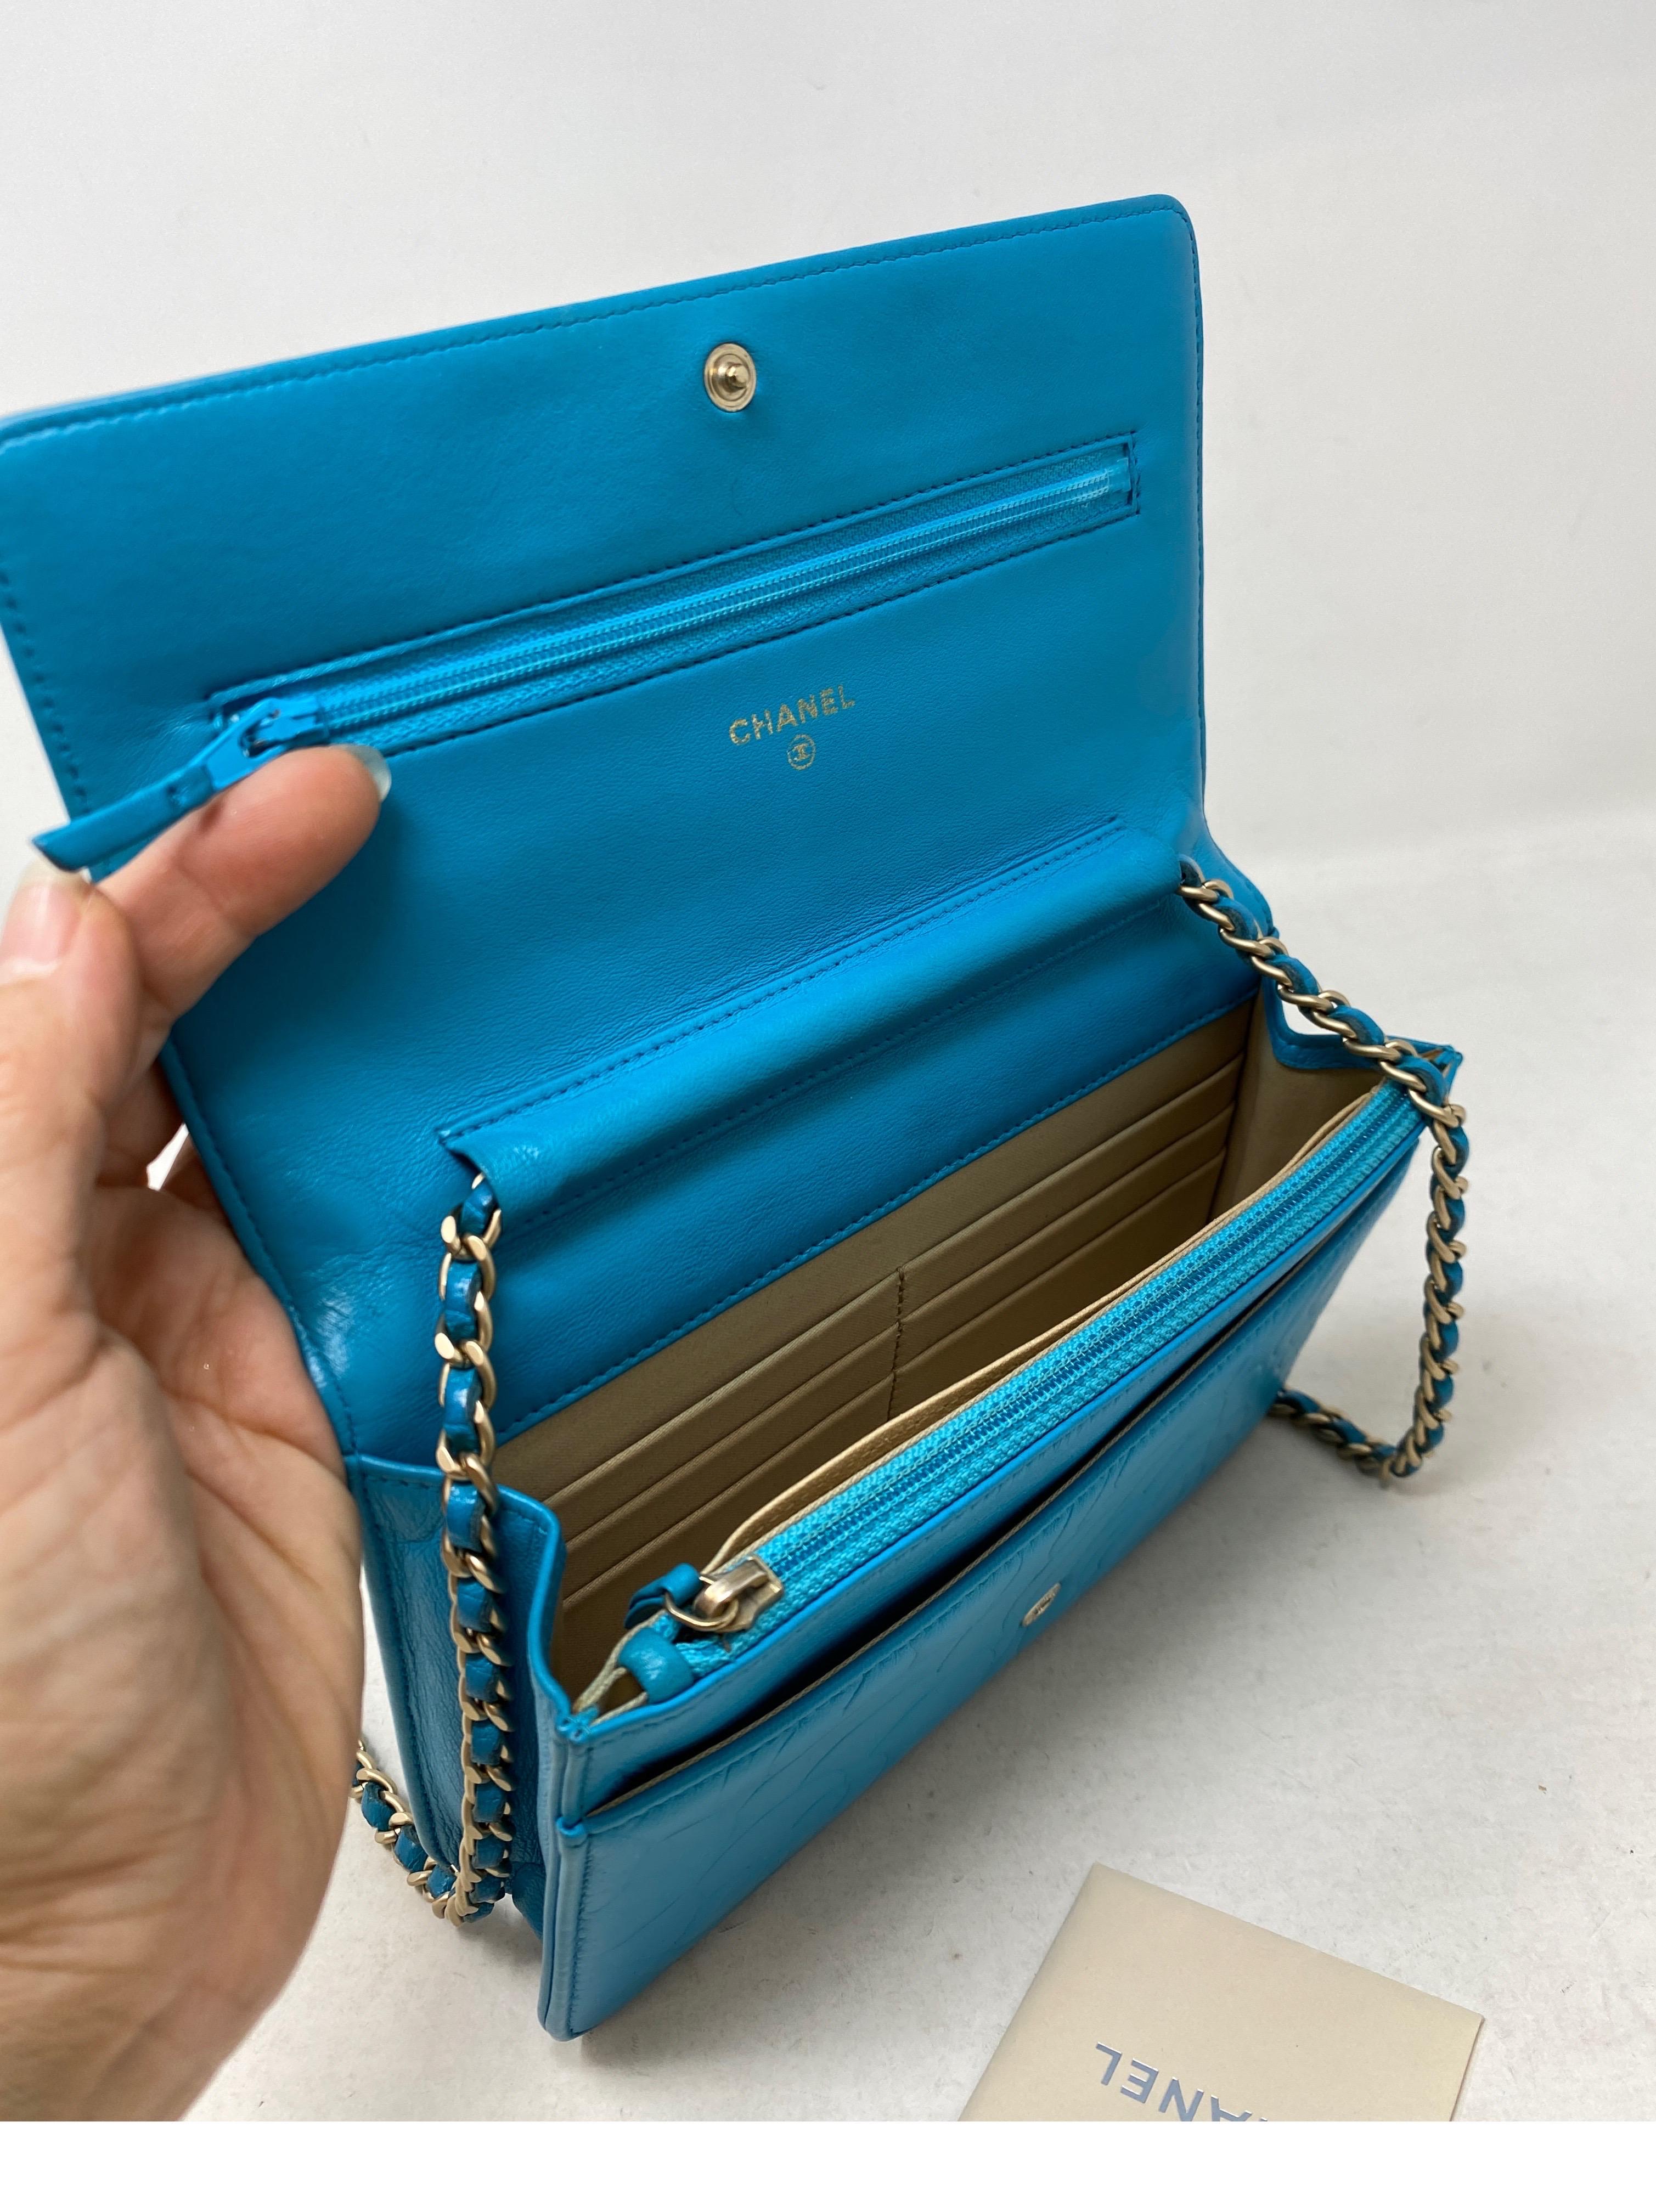 Chanel Teal Wallet On A Chain Bag  16